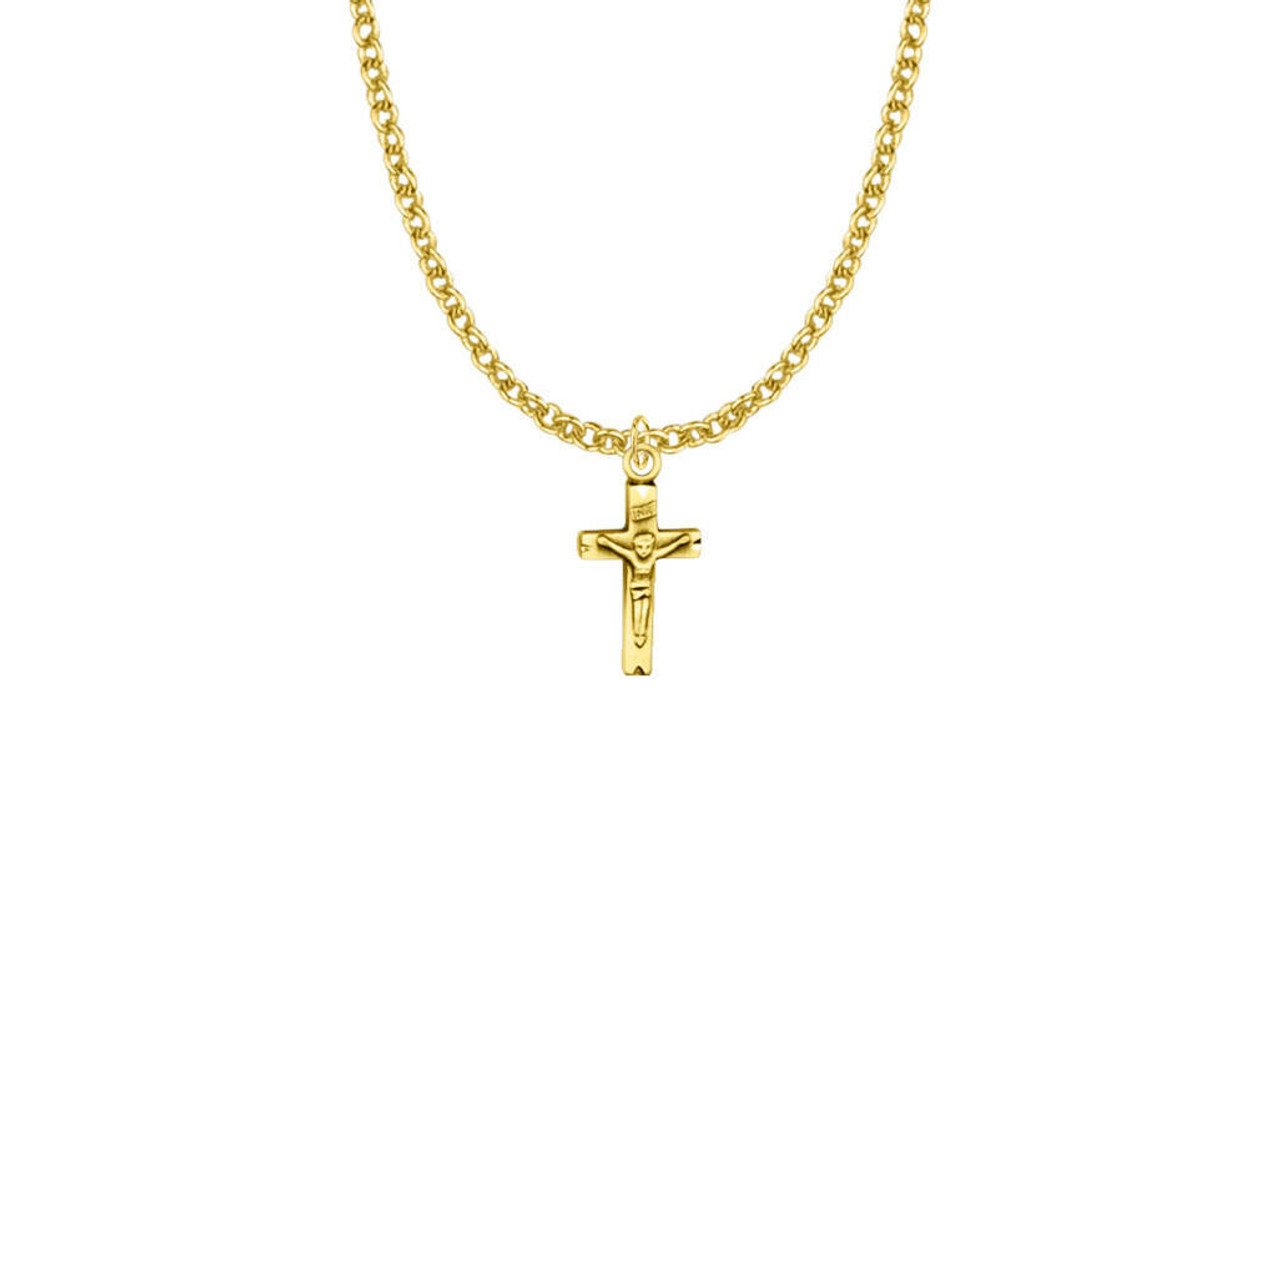 Tiny Cross Necklace Gold Filled